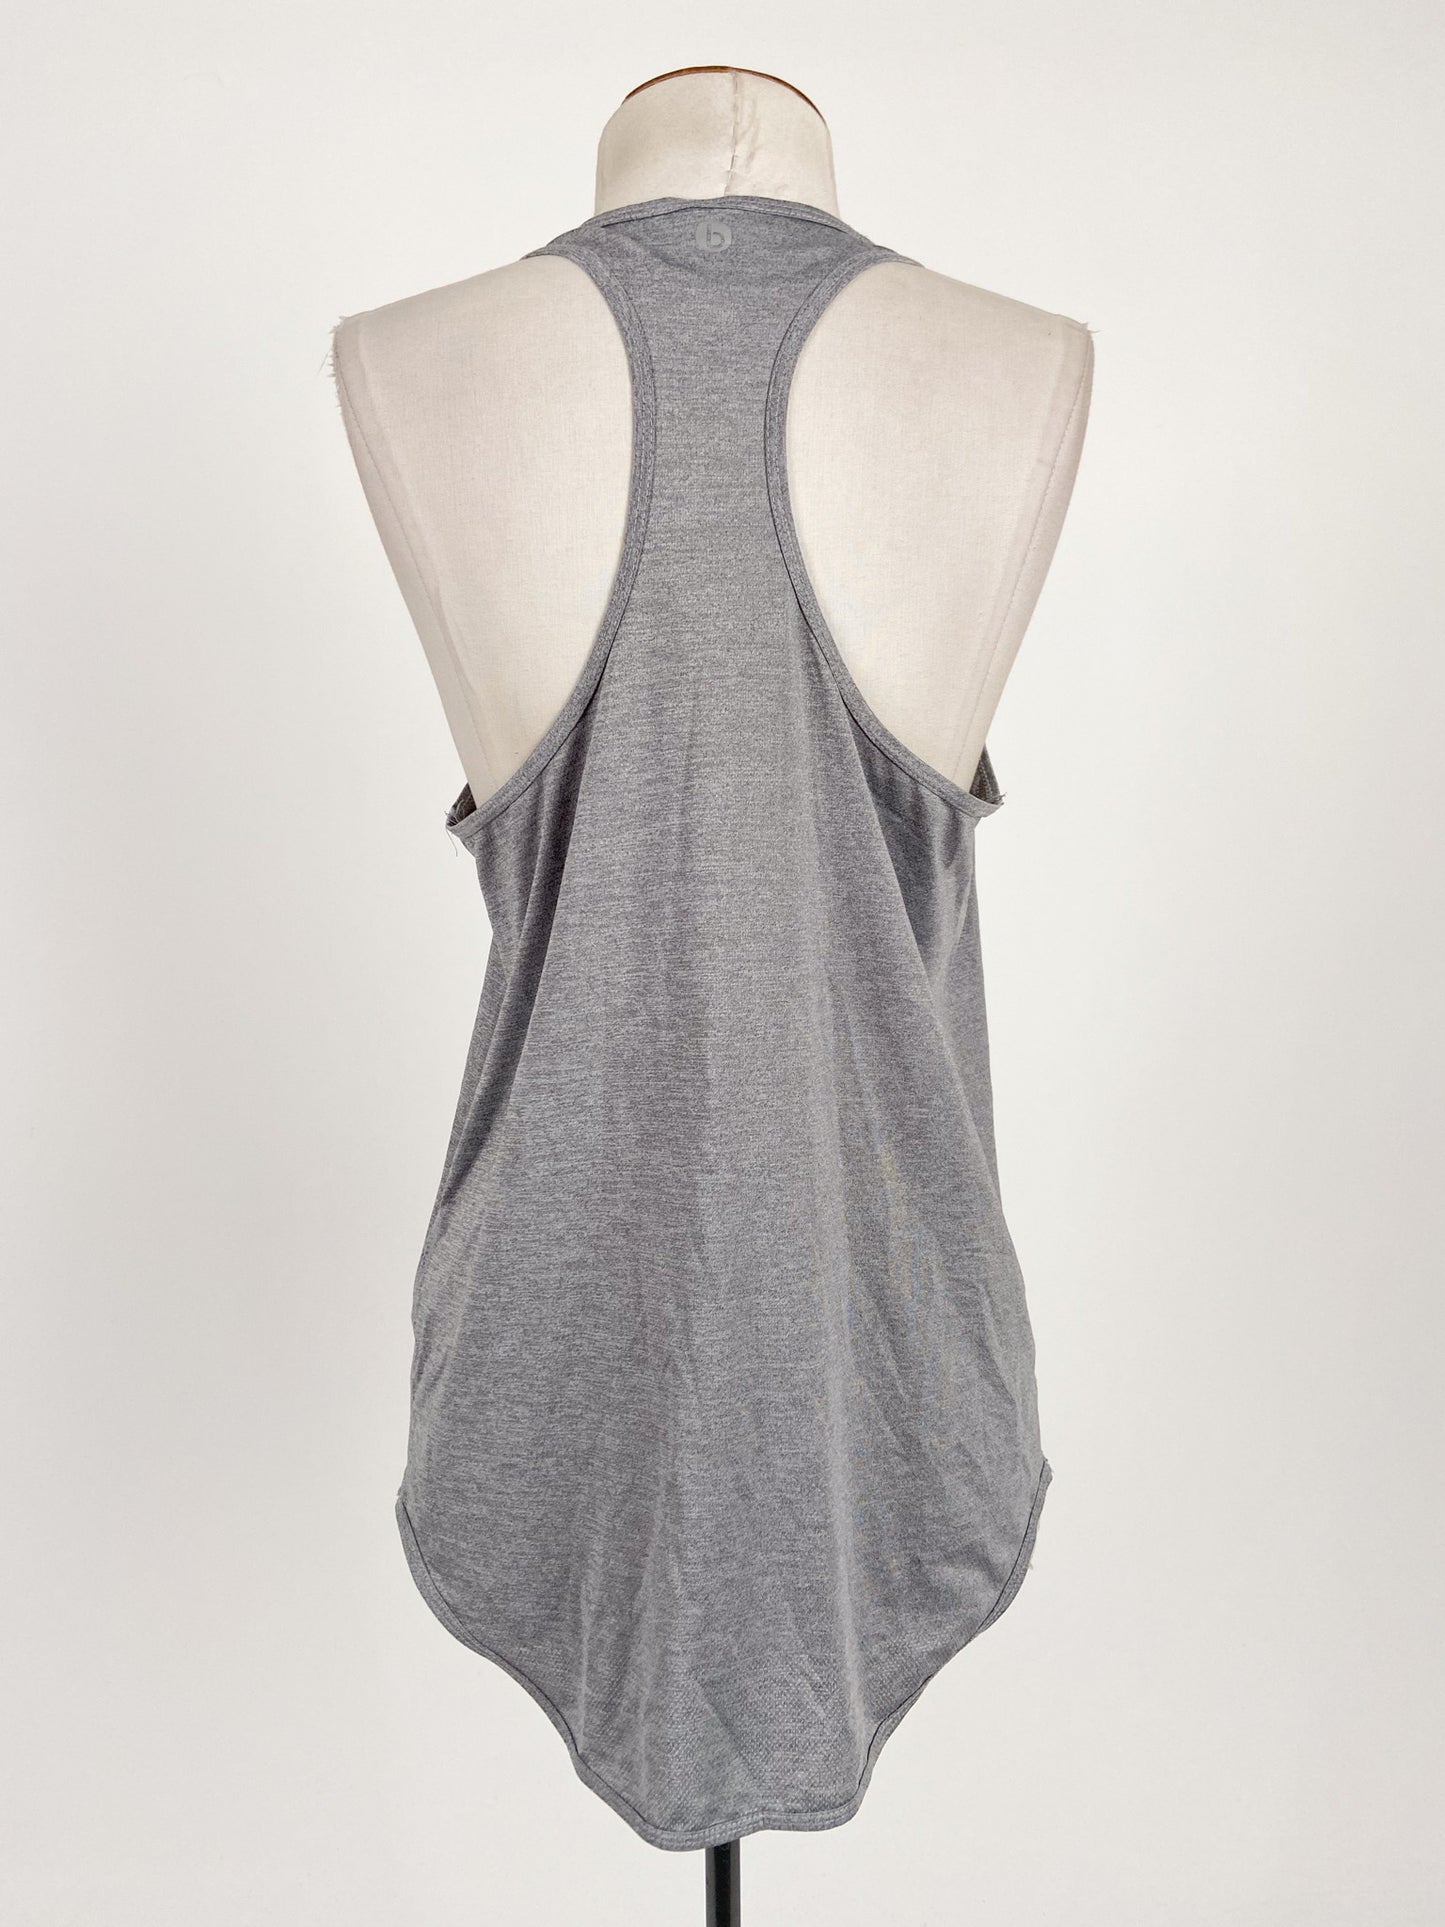 Cotton On | Grey Casual Activewear Top | Size S